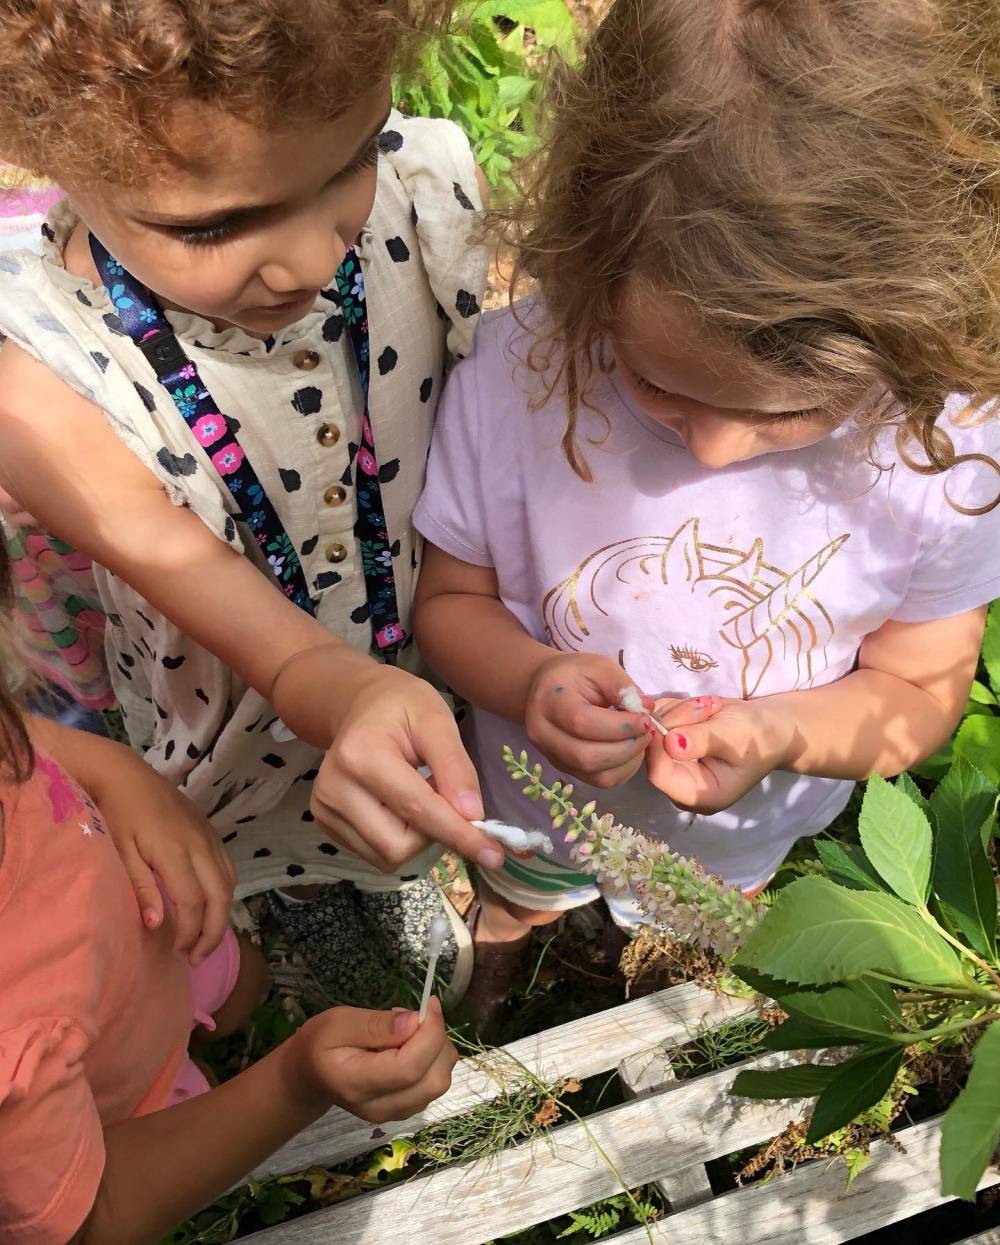 TOP NEW JERSEY ADVENTURE CAMP: Cora Hartshorn Nature Discovery  is a Top Adventure Summer Camp located in Short Hills New Jersey offering many fun and enriching Adventure and other camp programs. 